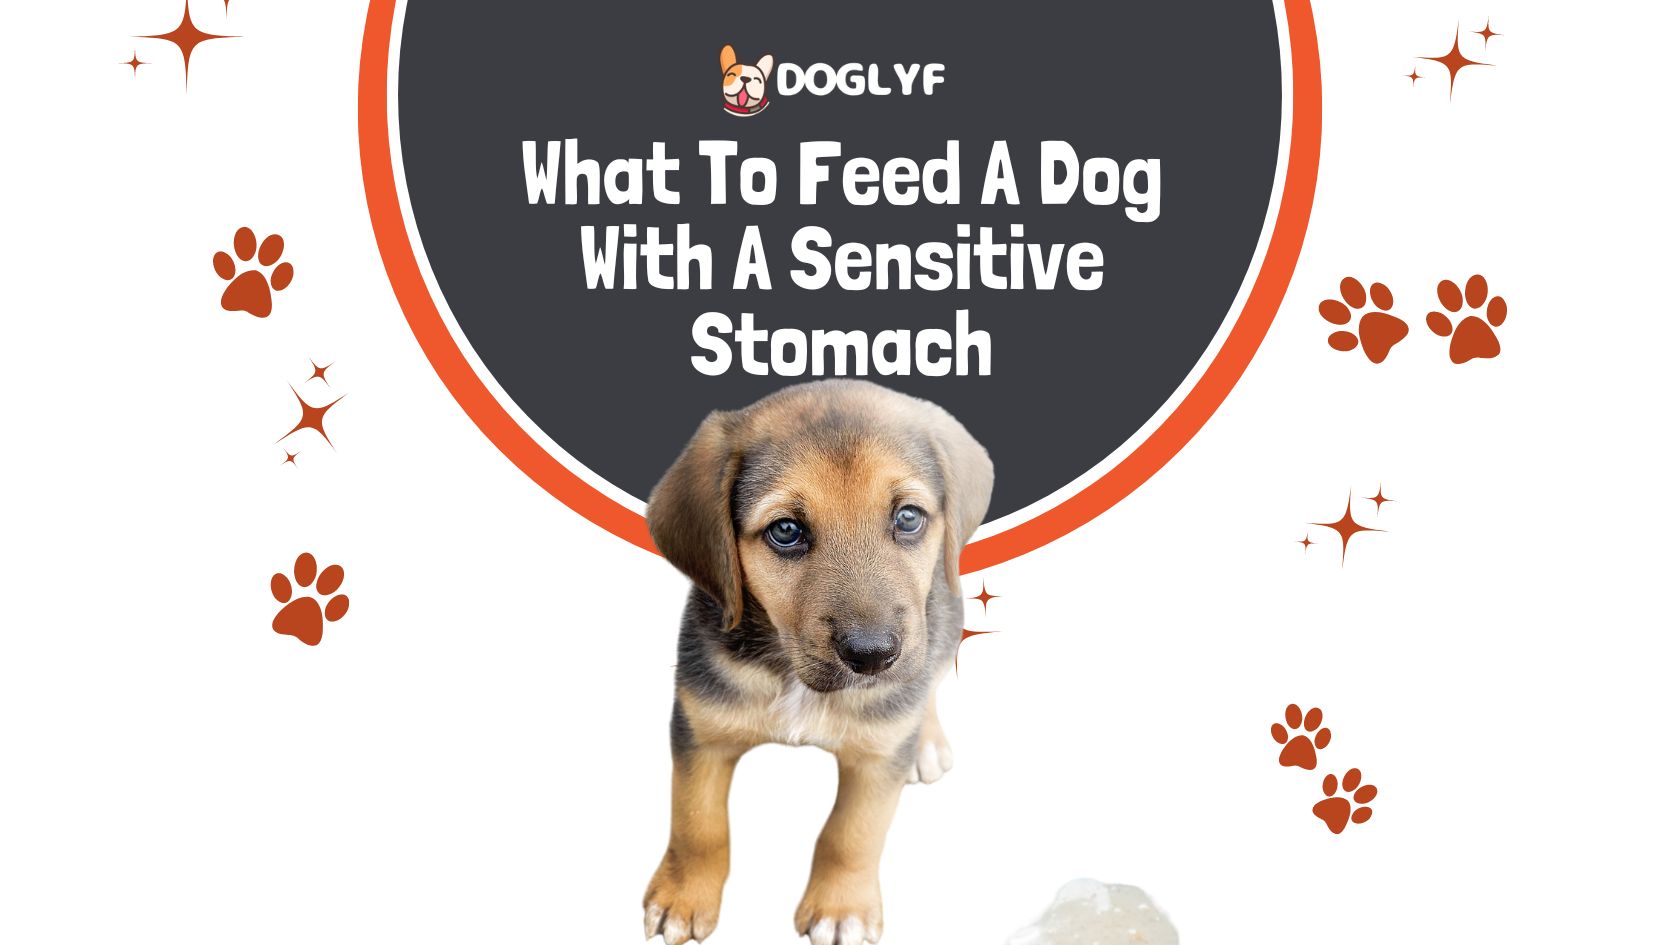 What To Feed A Dog With A Sensitive Stomach